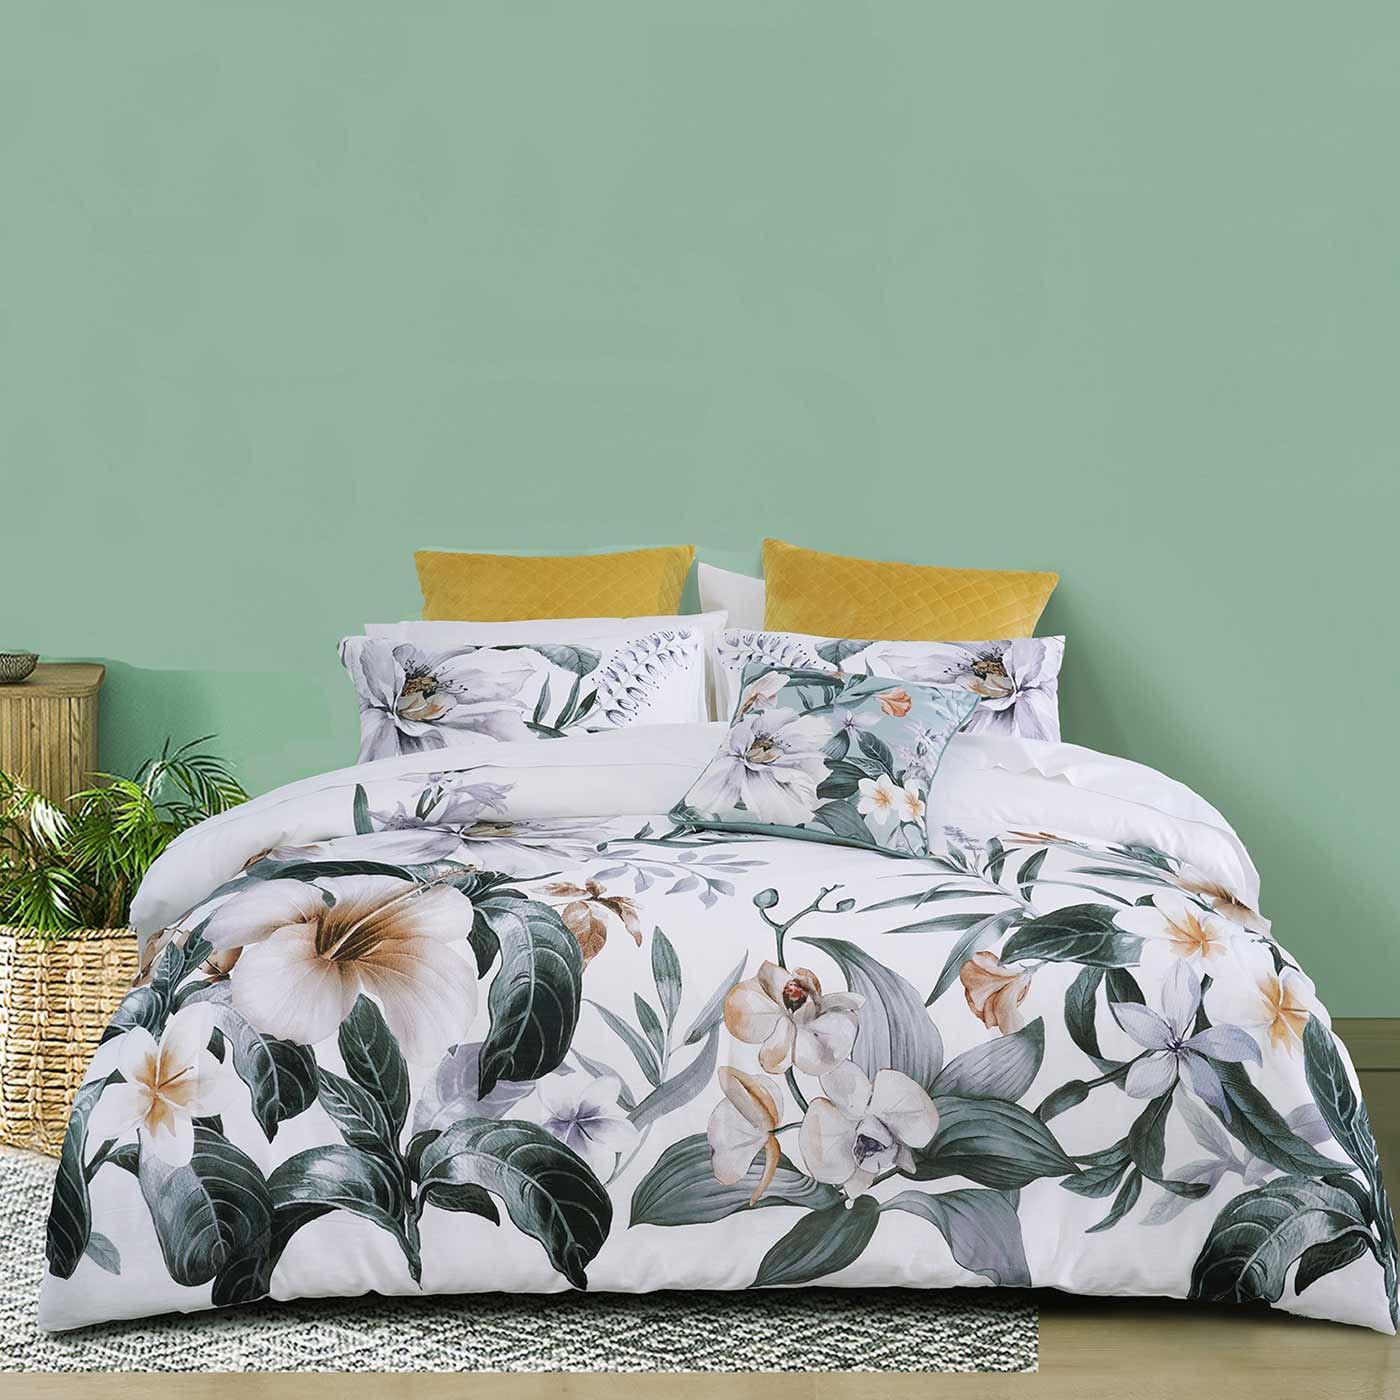 Printed on a gorgeous linen look cotton fabric, this beautiful floral design features stunning green tones that are depicted in the leaves which are scattered across the bed. Add the coordinate printed velvet cushion to complete the look. 